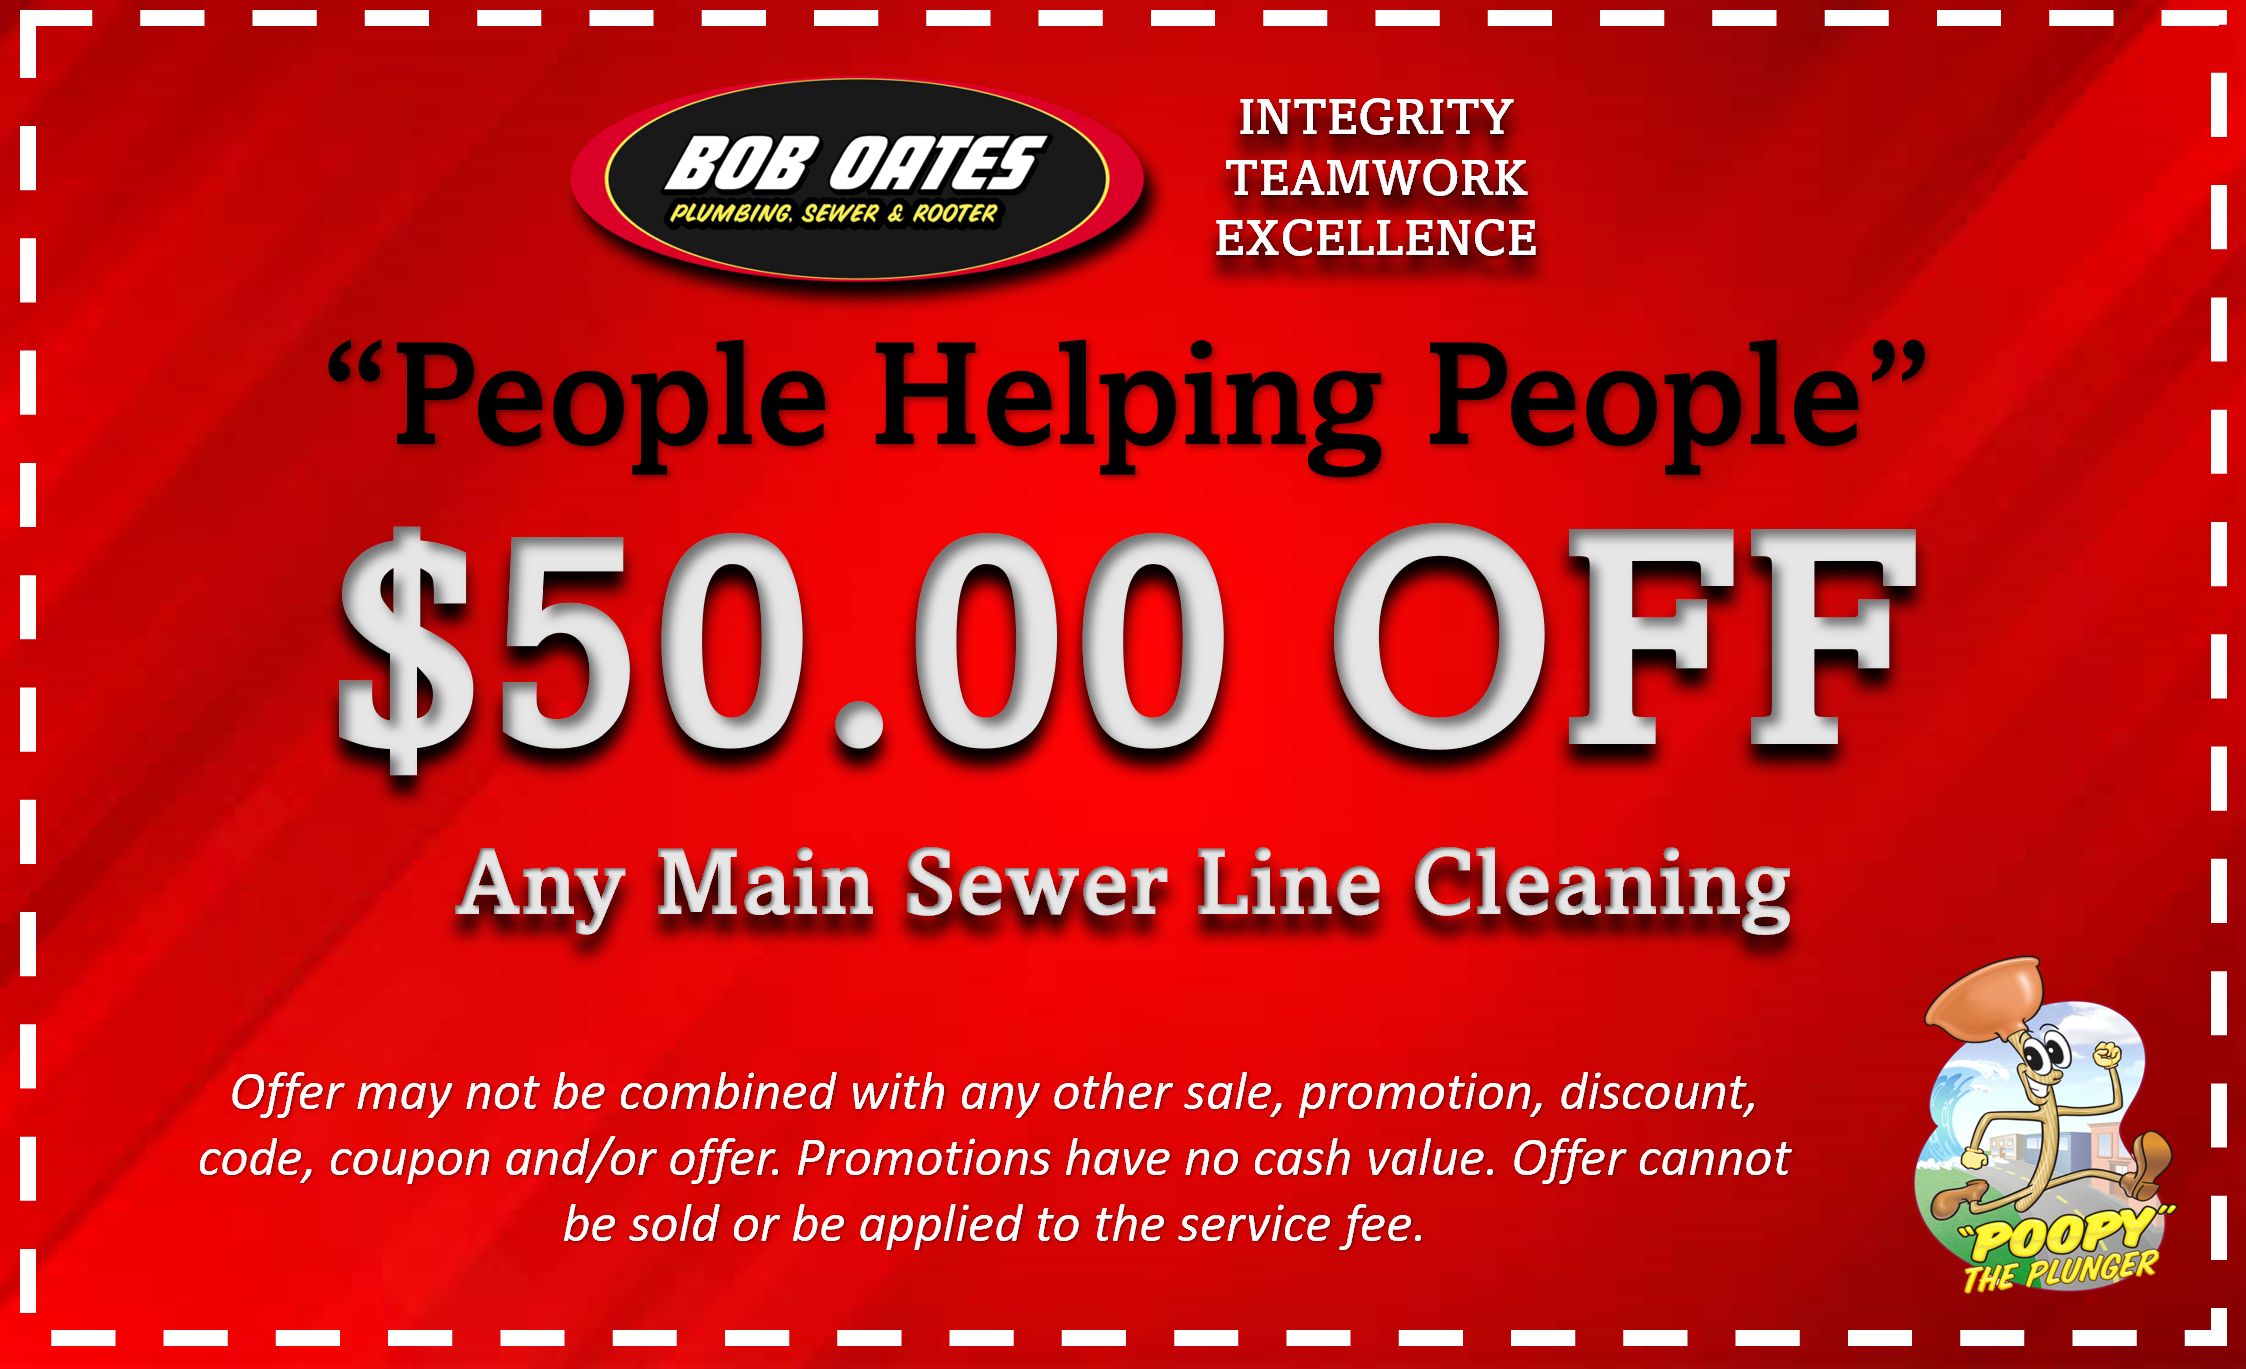 Coupon for $50 off any main sewer line cleaning